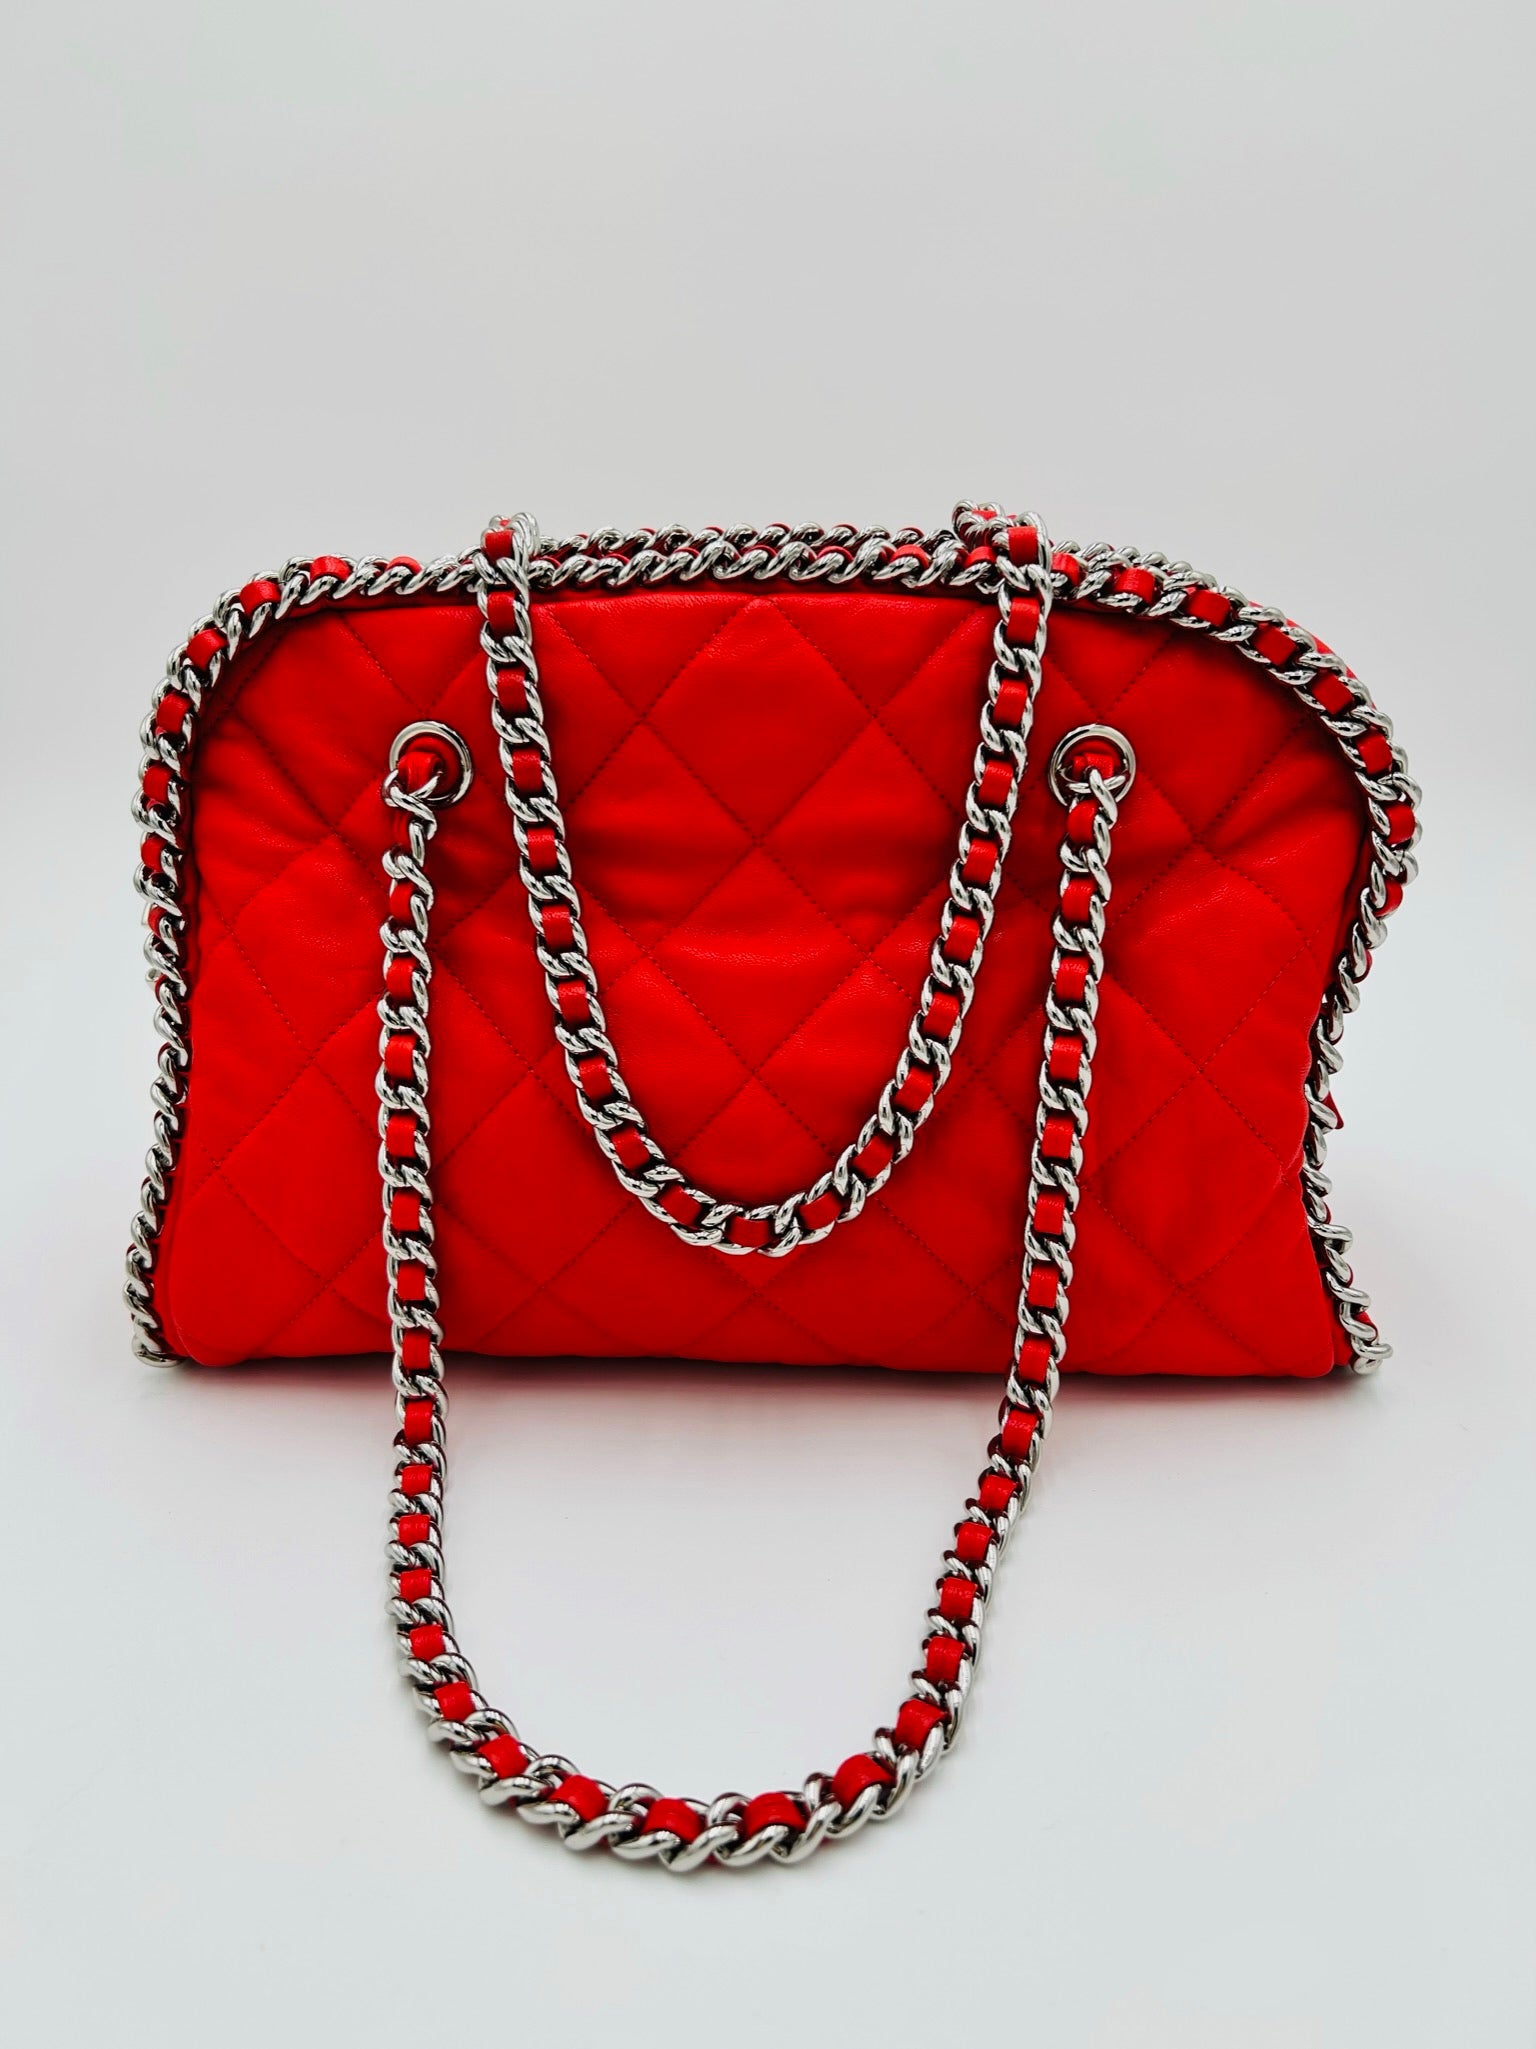 CHANEL CRUMPLED CALFSKIN CHAIN ALL OVER BRIGHT RED